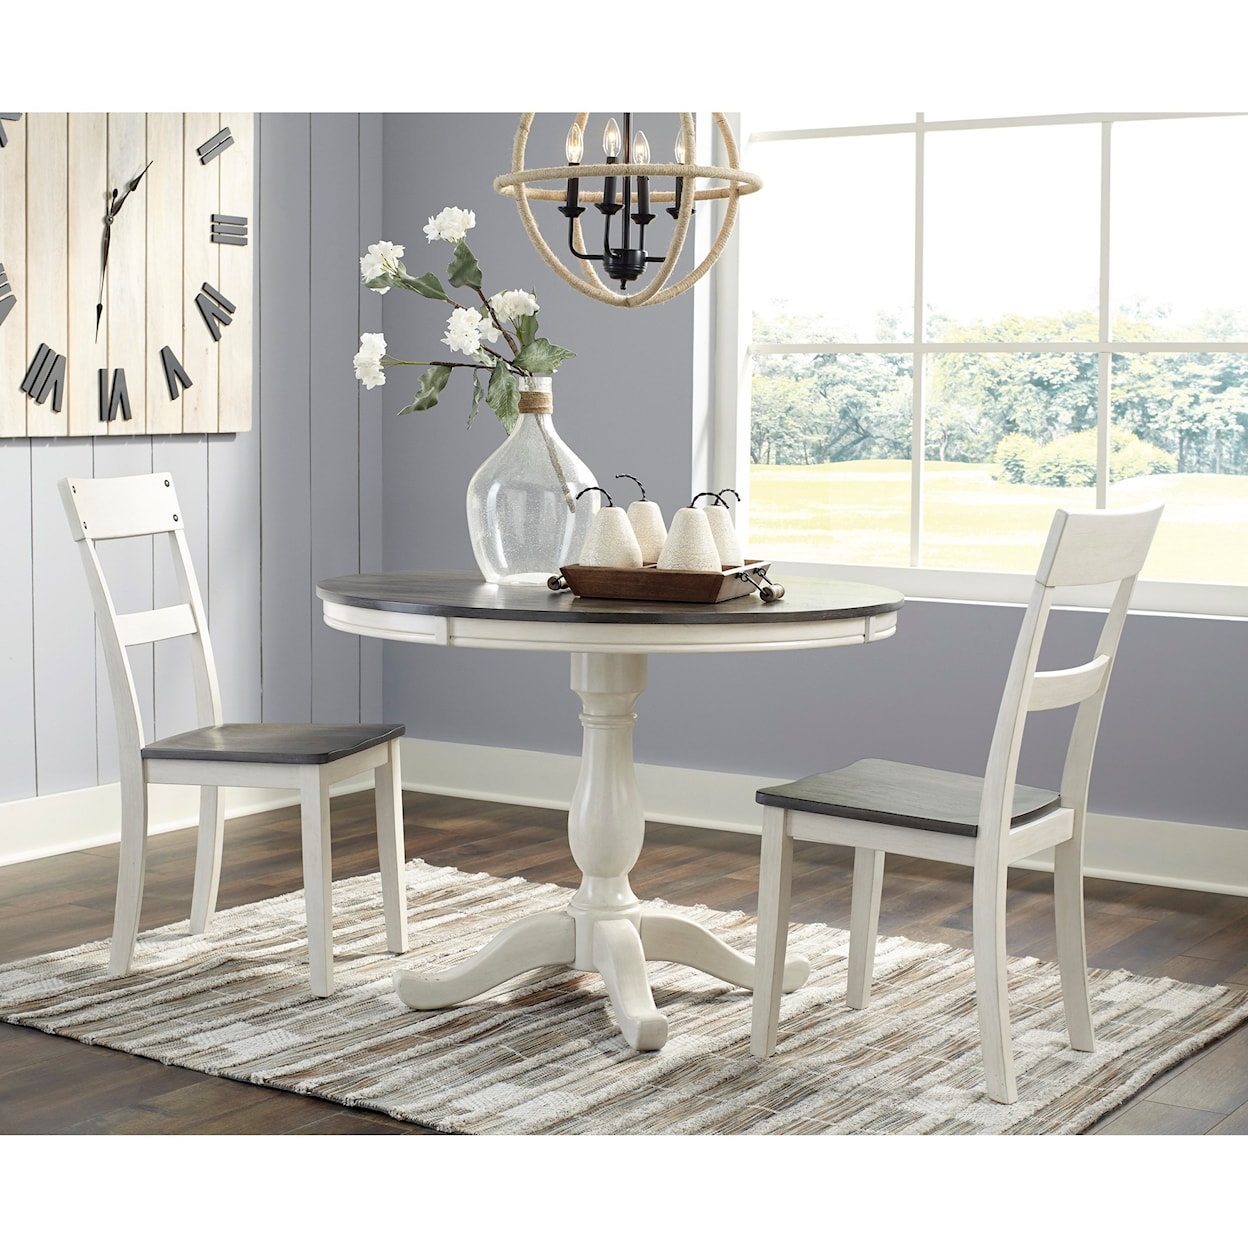 Ashley Signature Design Nelling Dining Room Table